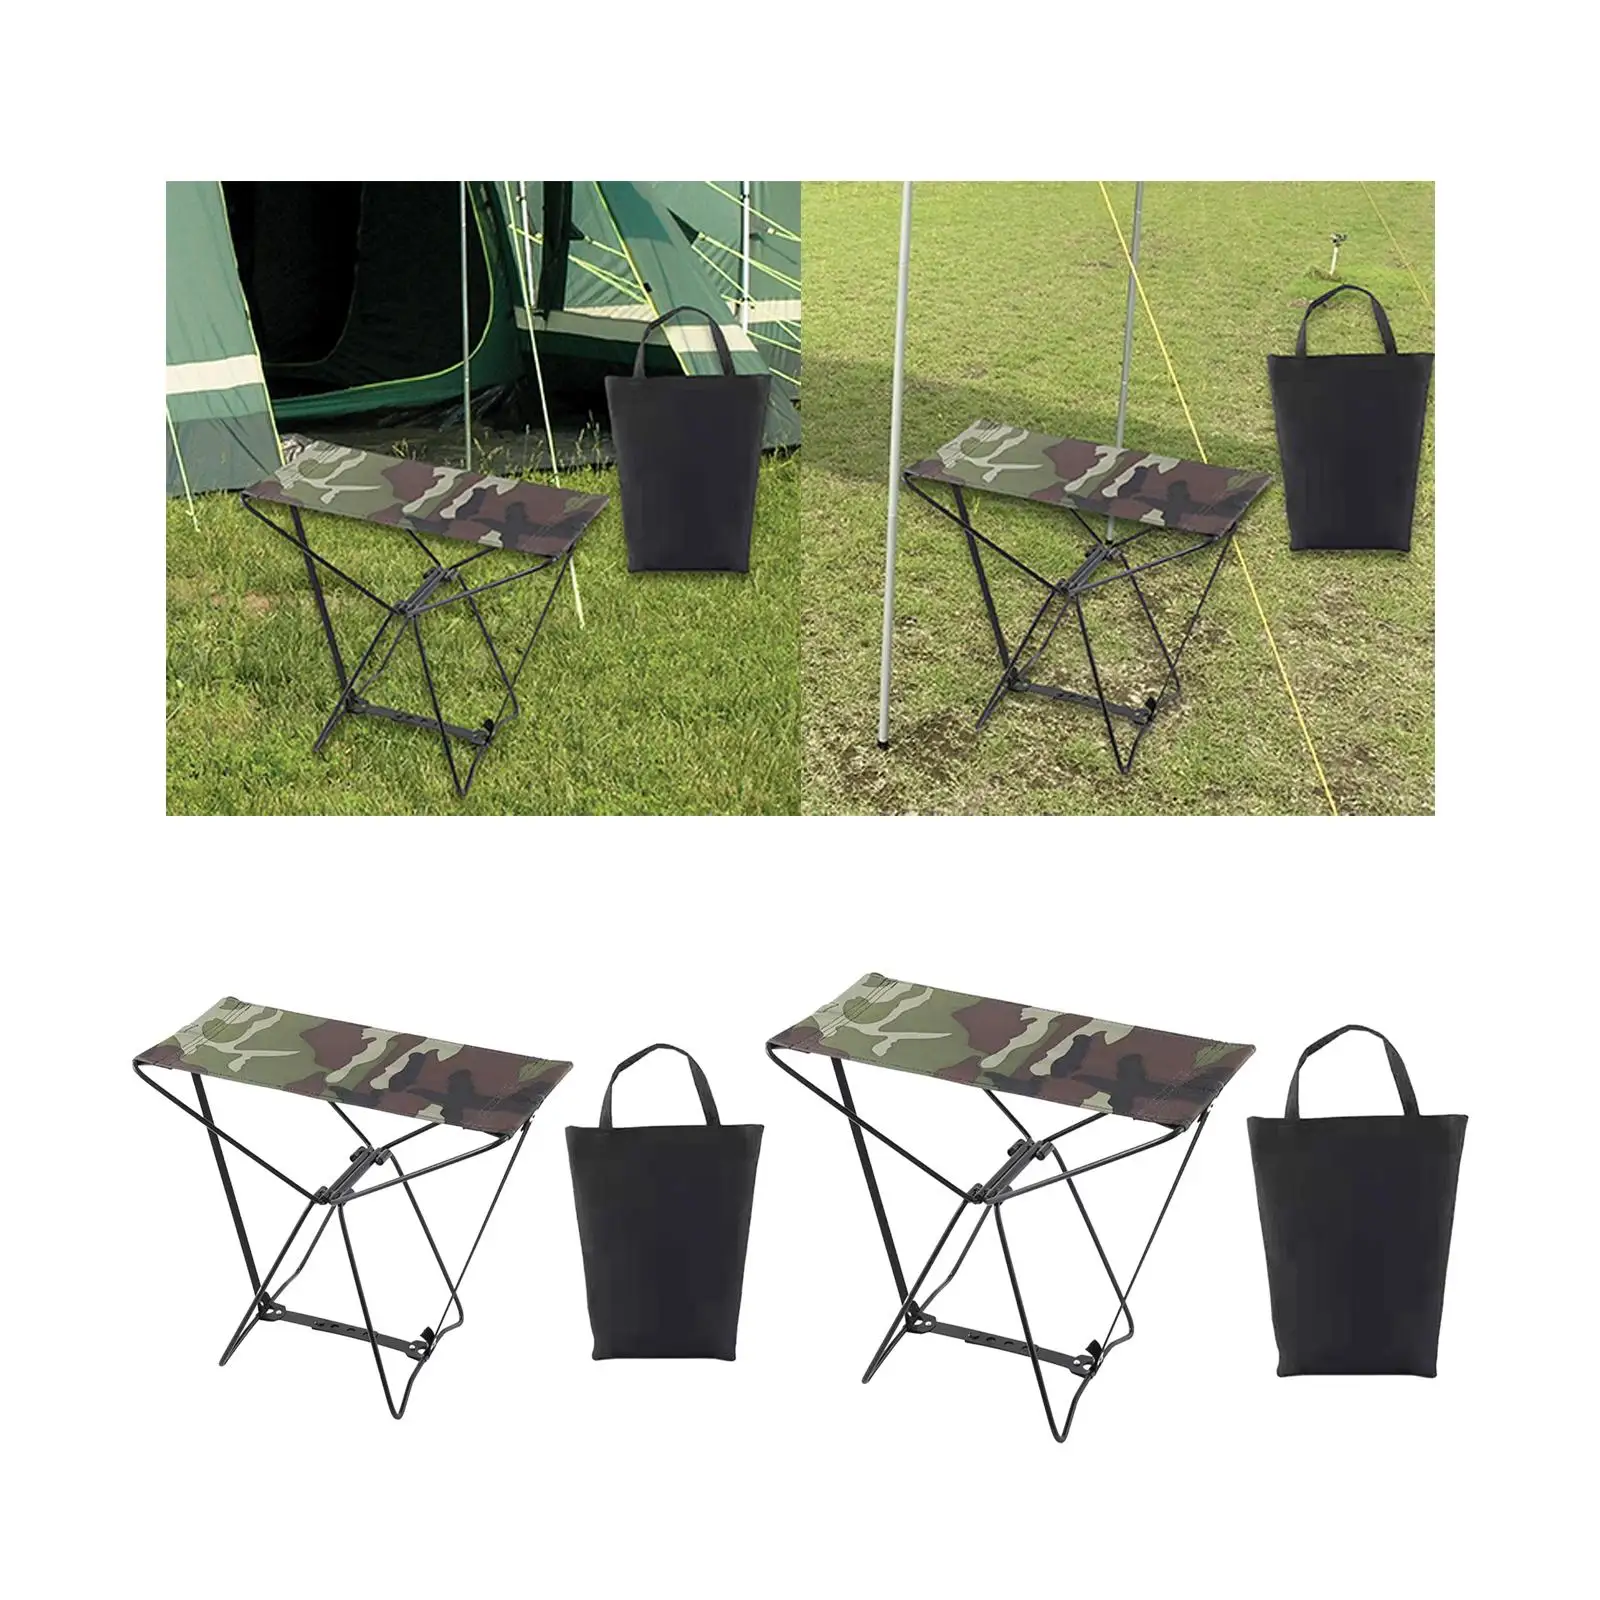 Camping Folding Stool Furniture Collapsible Stool for Picnic Hiking Yard